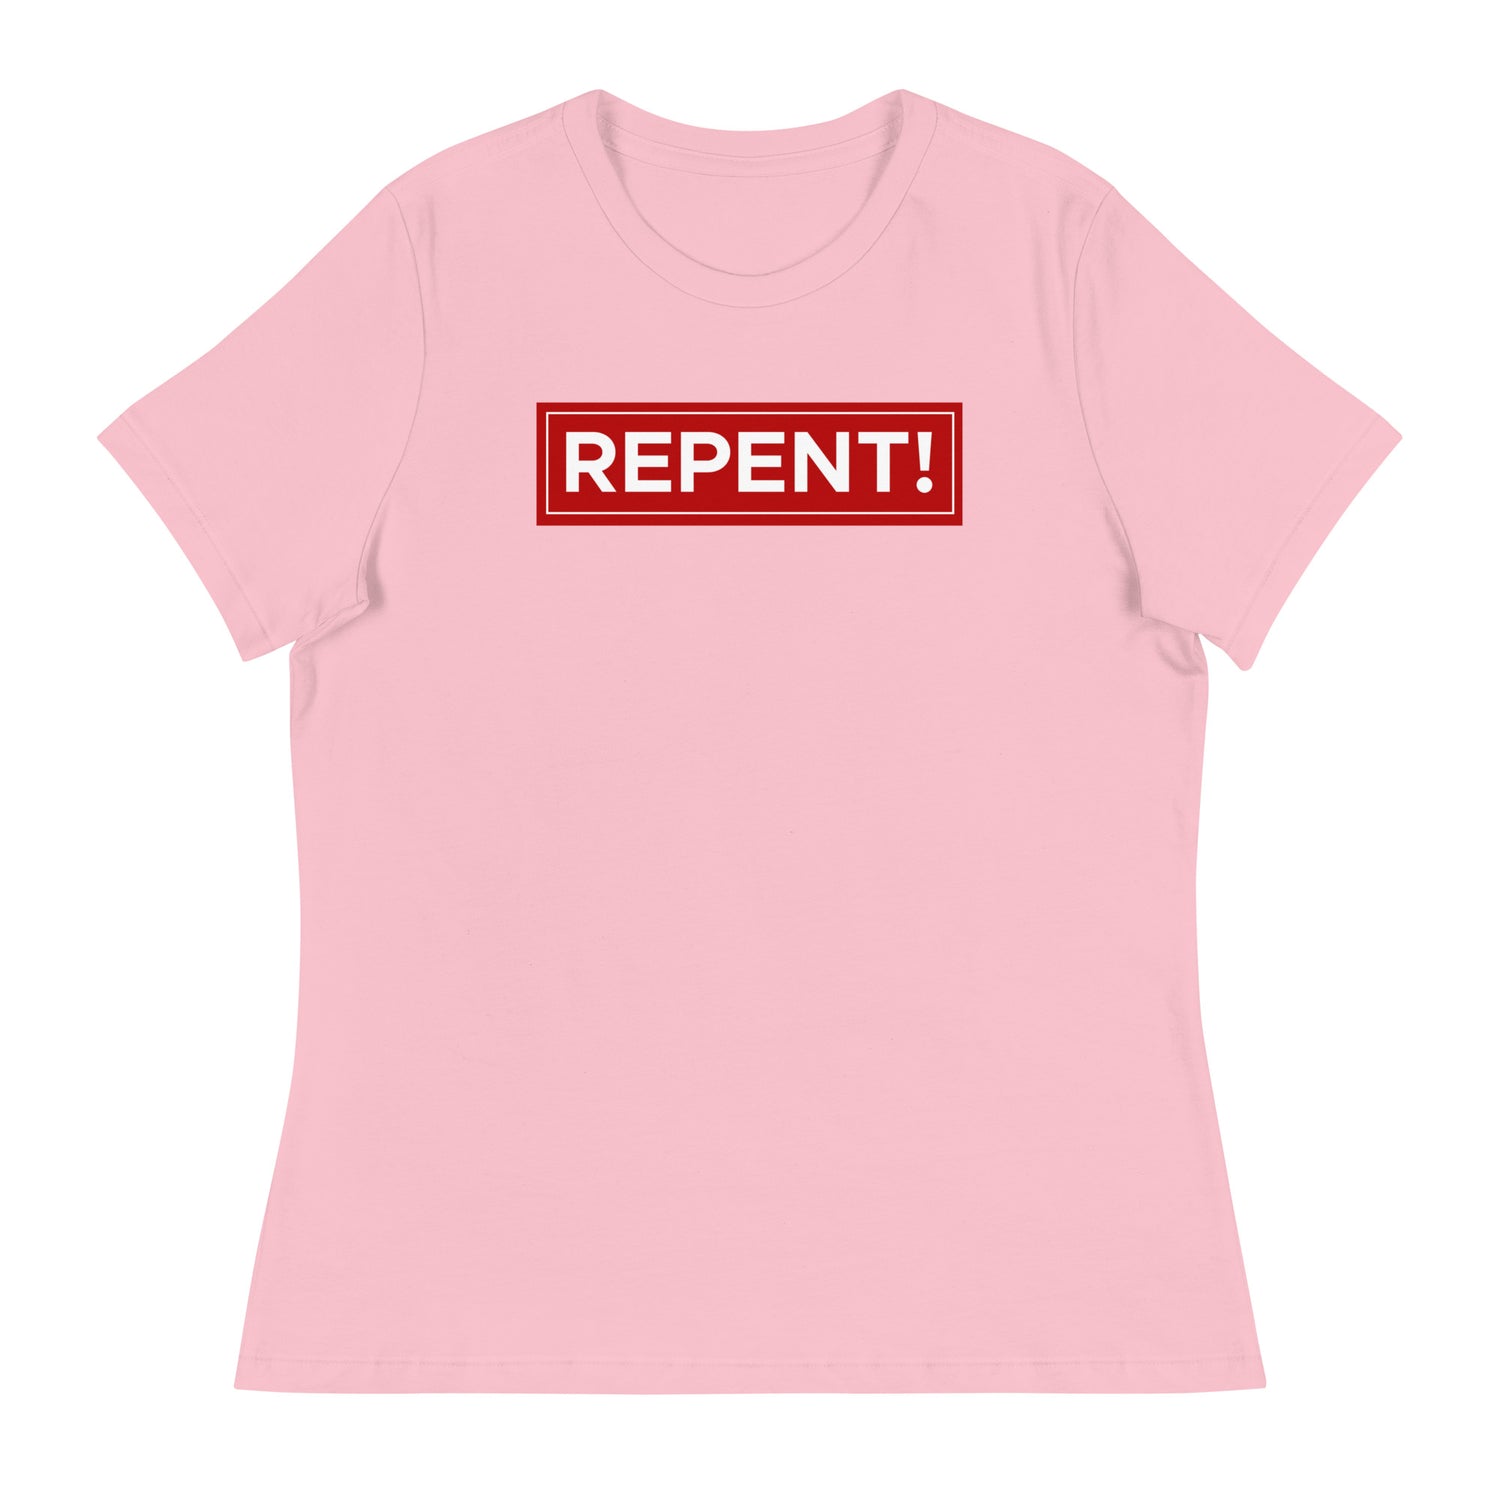 REPENT RED WOMENS FRONT AND BACK T-SHIRT